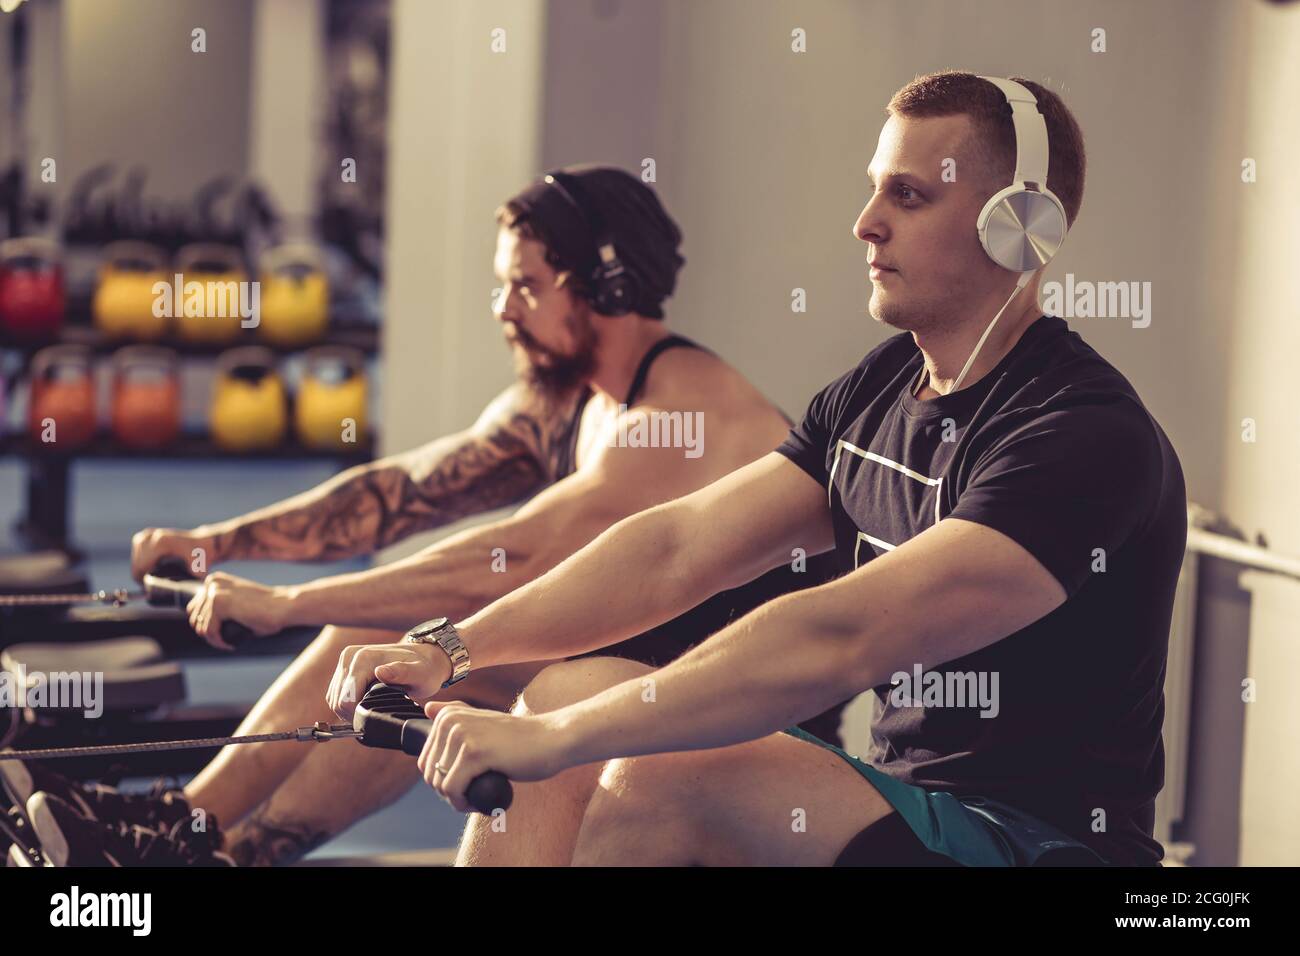 young sportsmen having hard workout on rowing machines in gym. Stock Photo